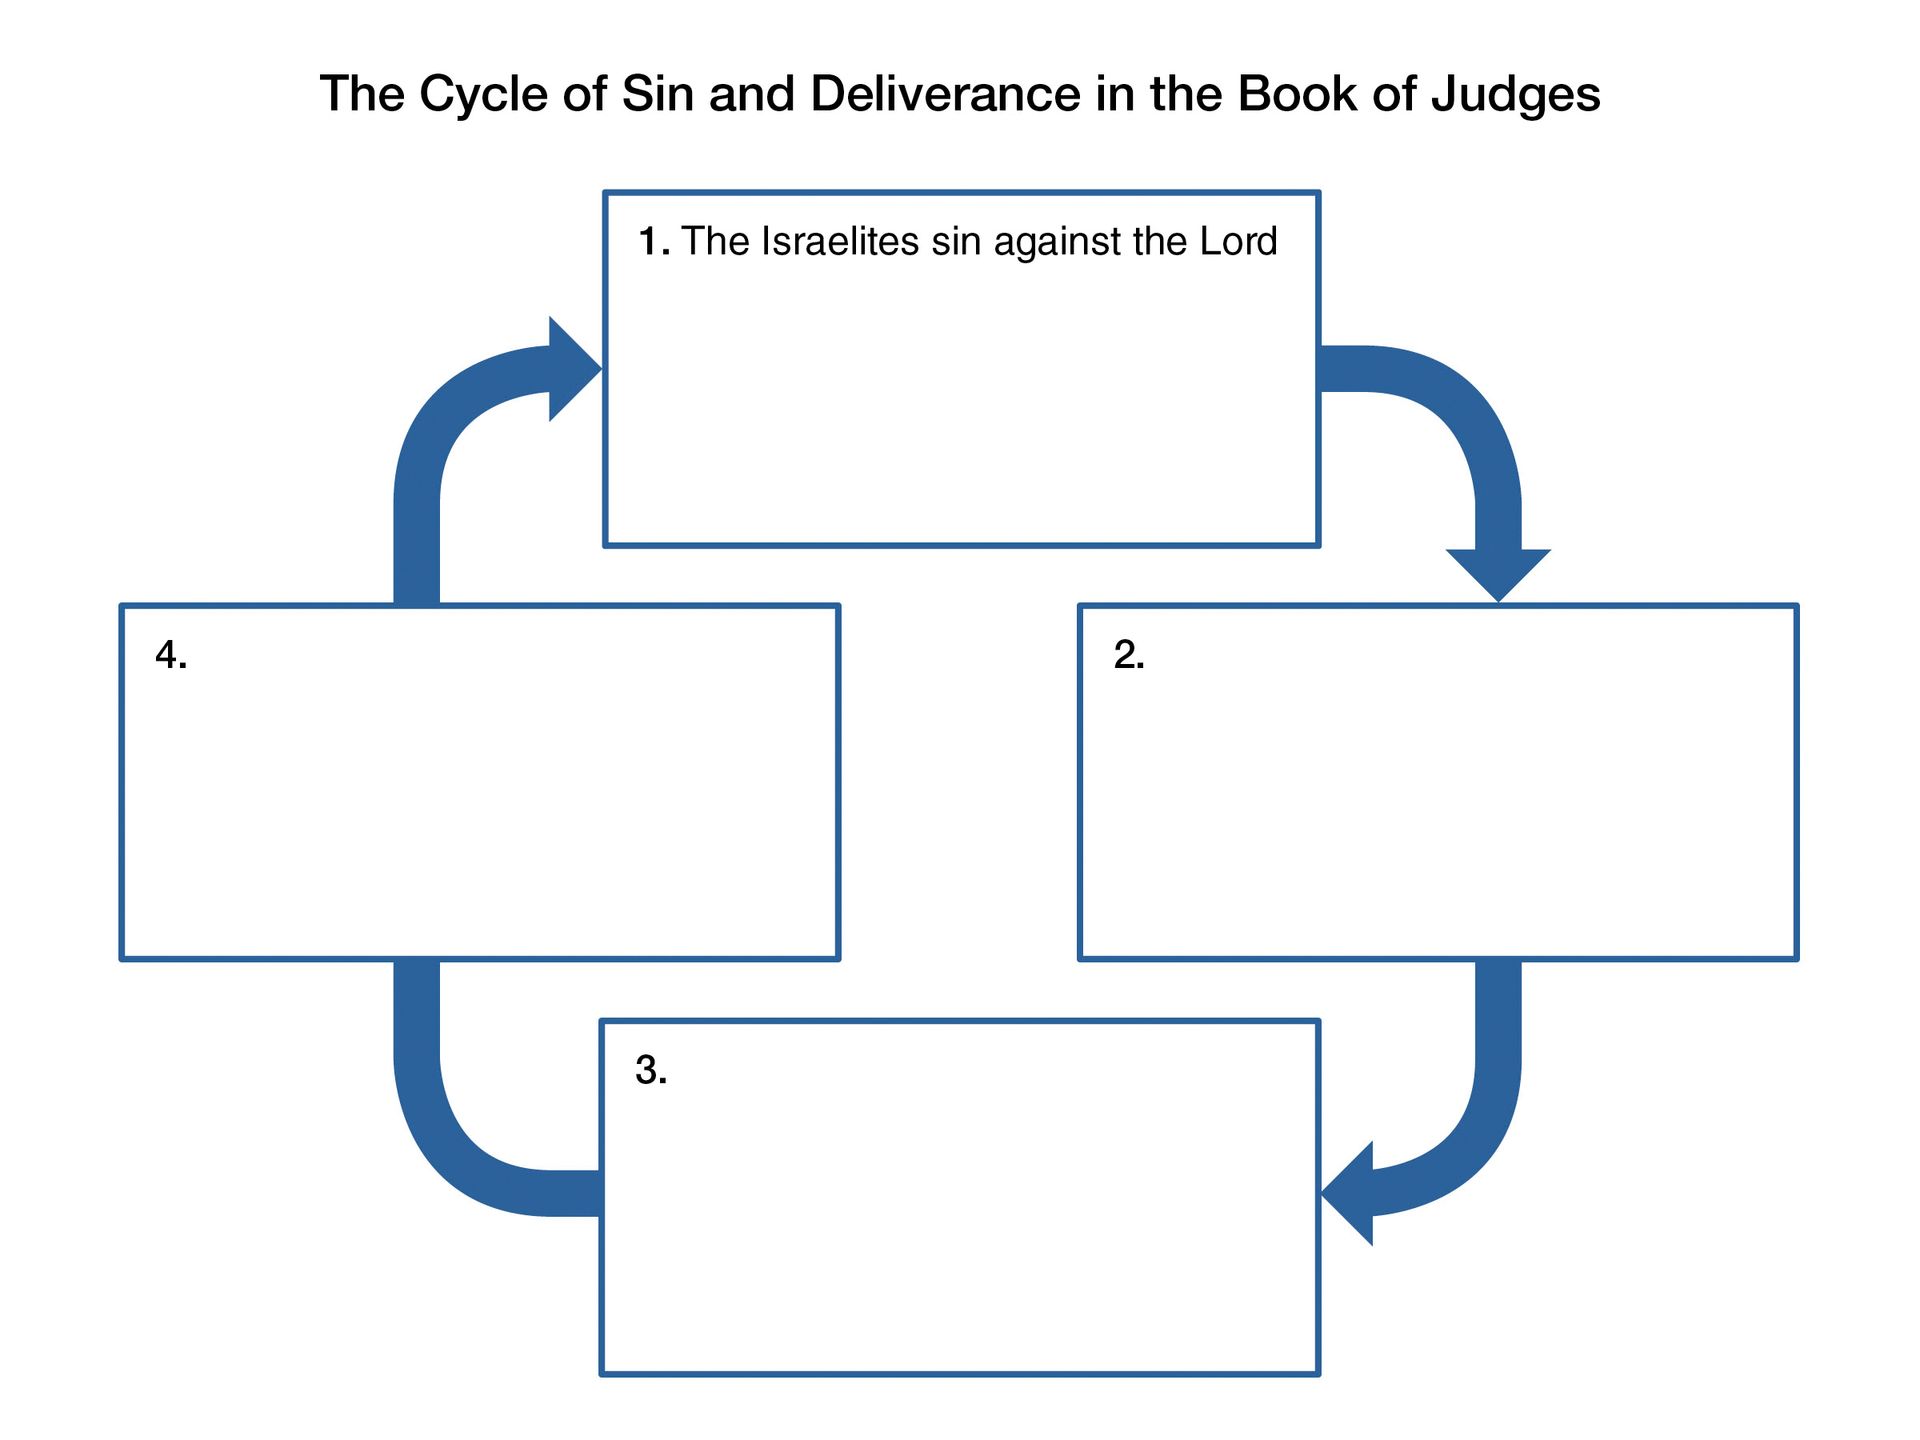 A diagram showing the cycle of sin and deliverance as outlined in the book of Judges.